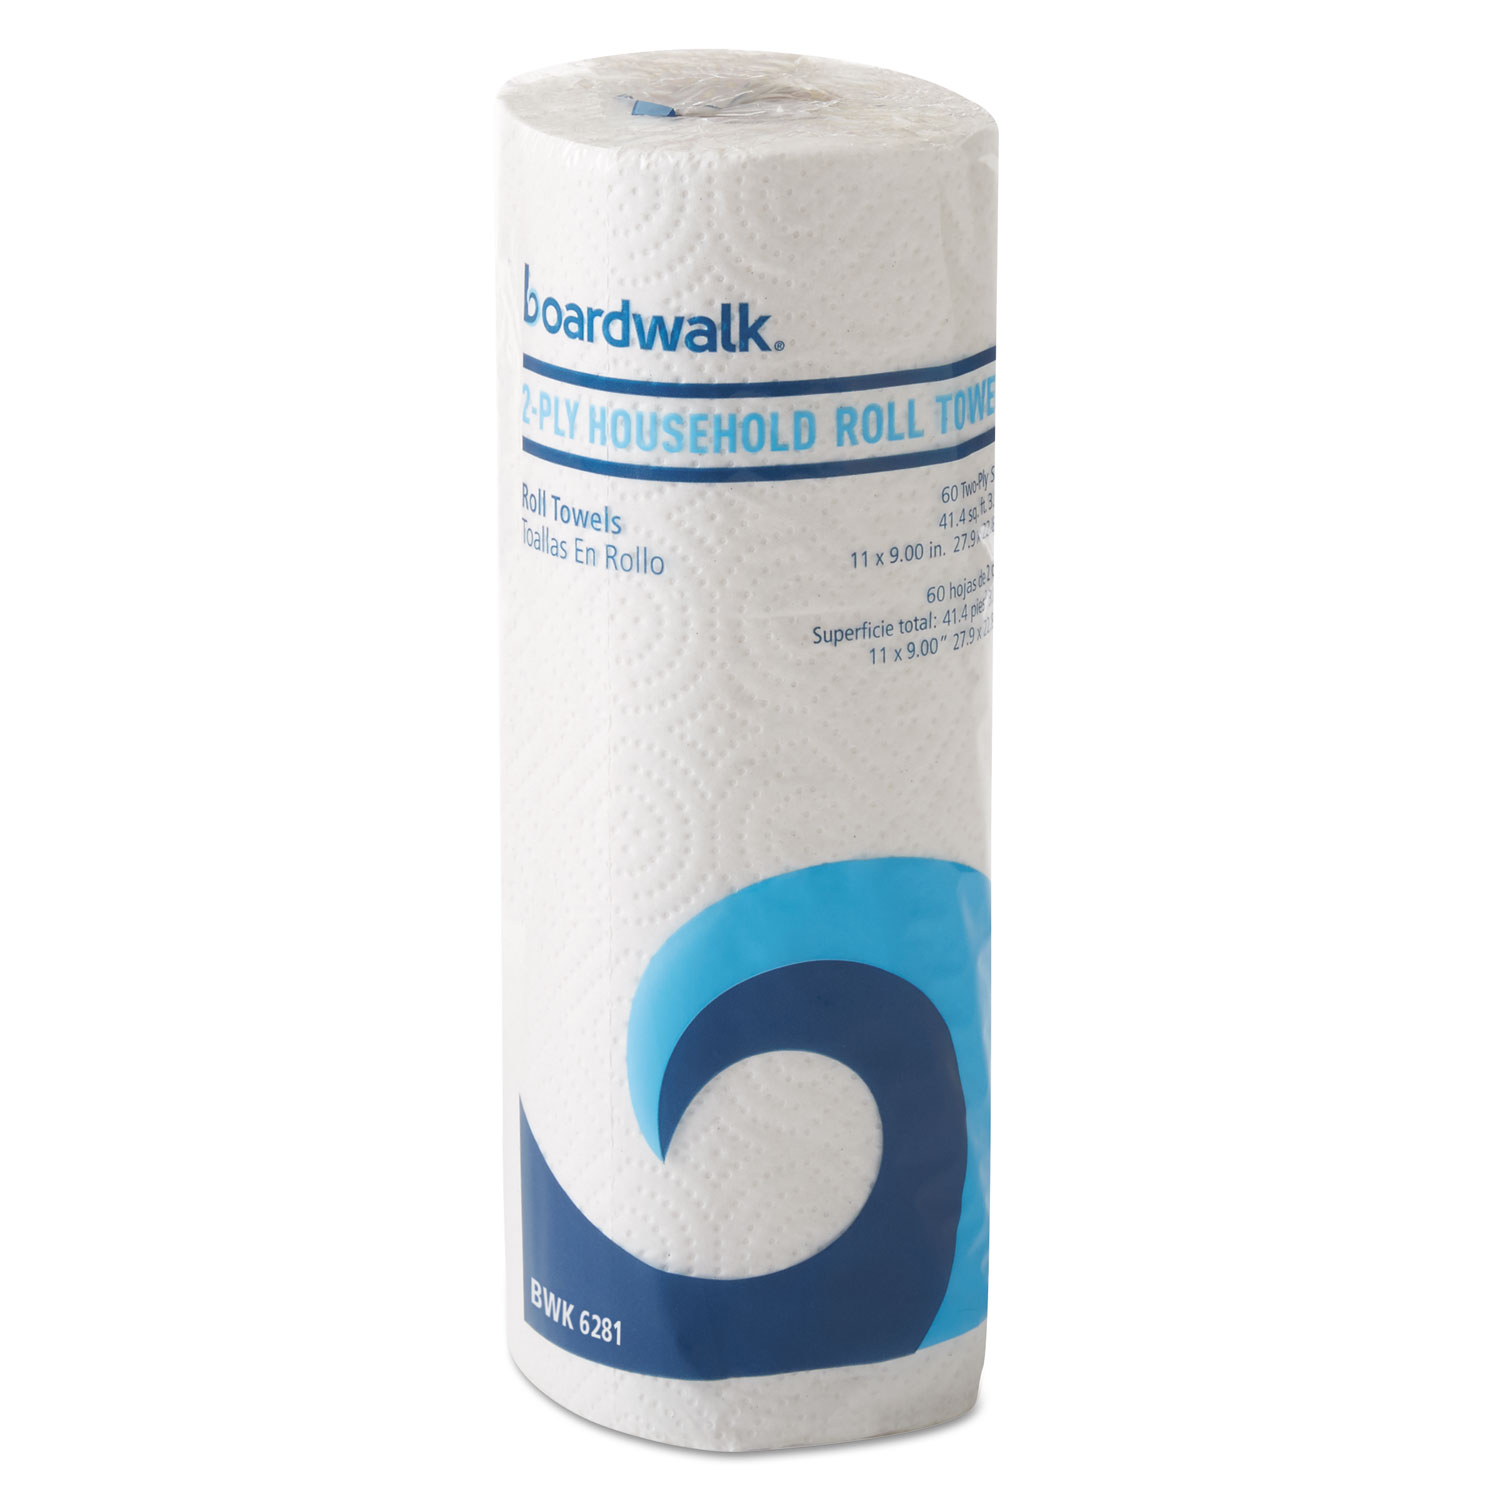  Boardwalk 6281 Office Packs Perforated Paper Towel Rolls, 2-Ply, White, 9 x 11, 60/Roll,15/Ct (BWK6281) 